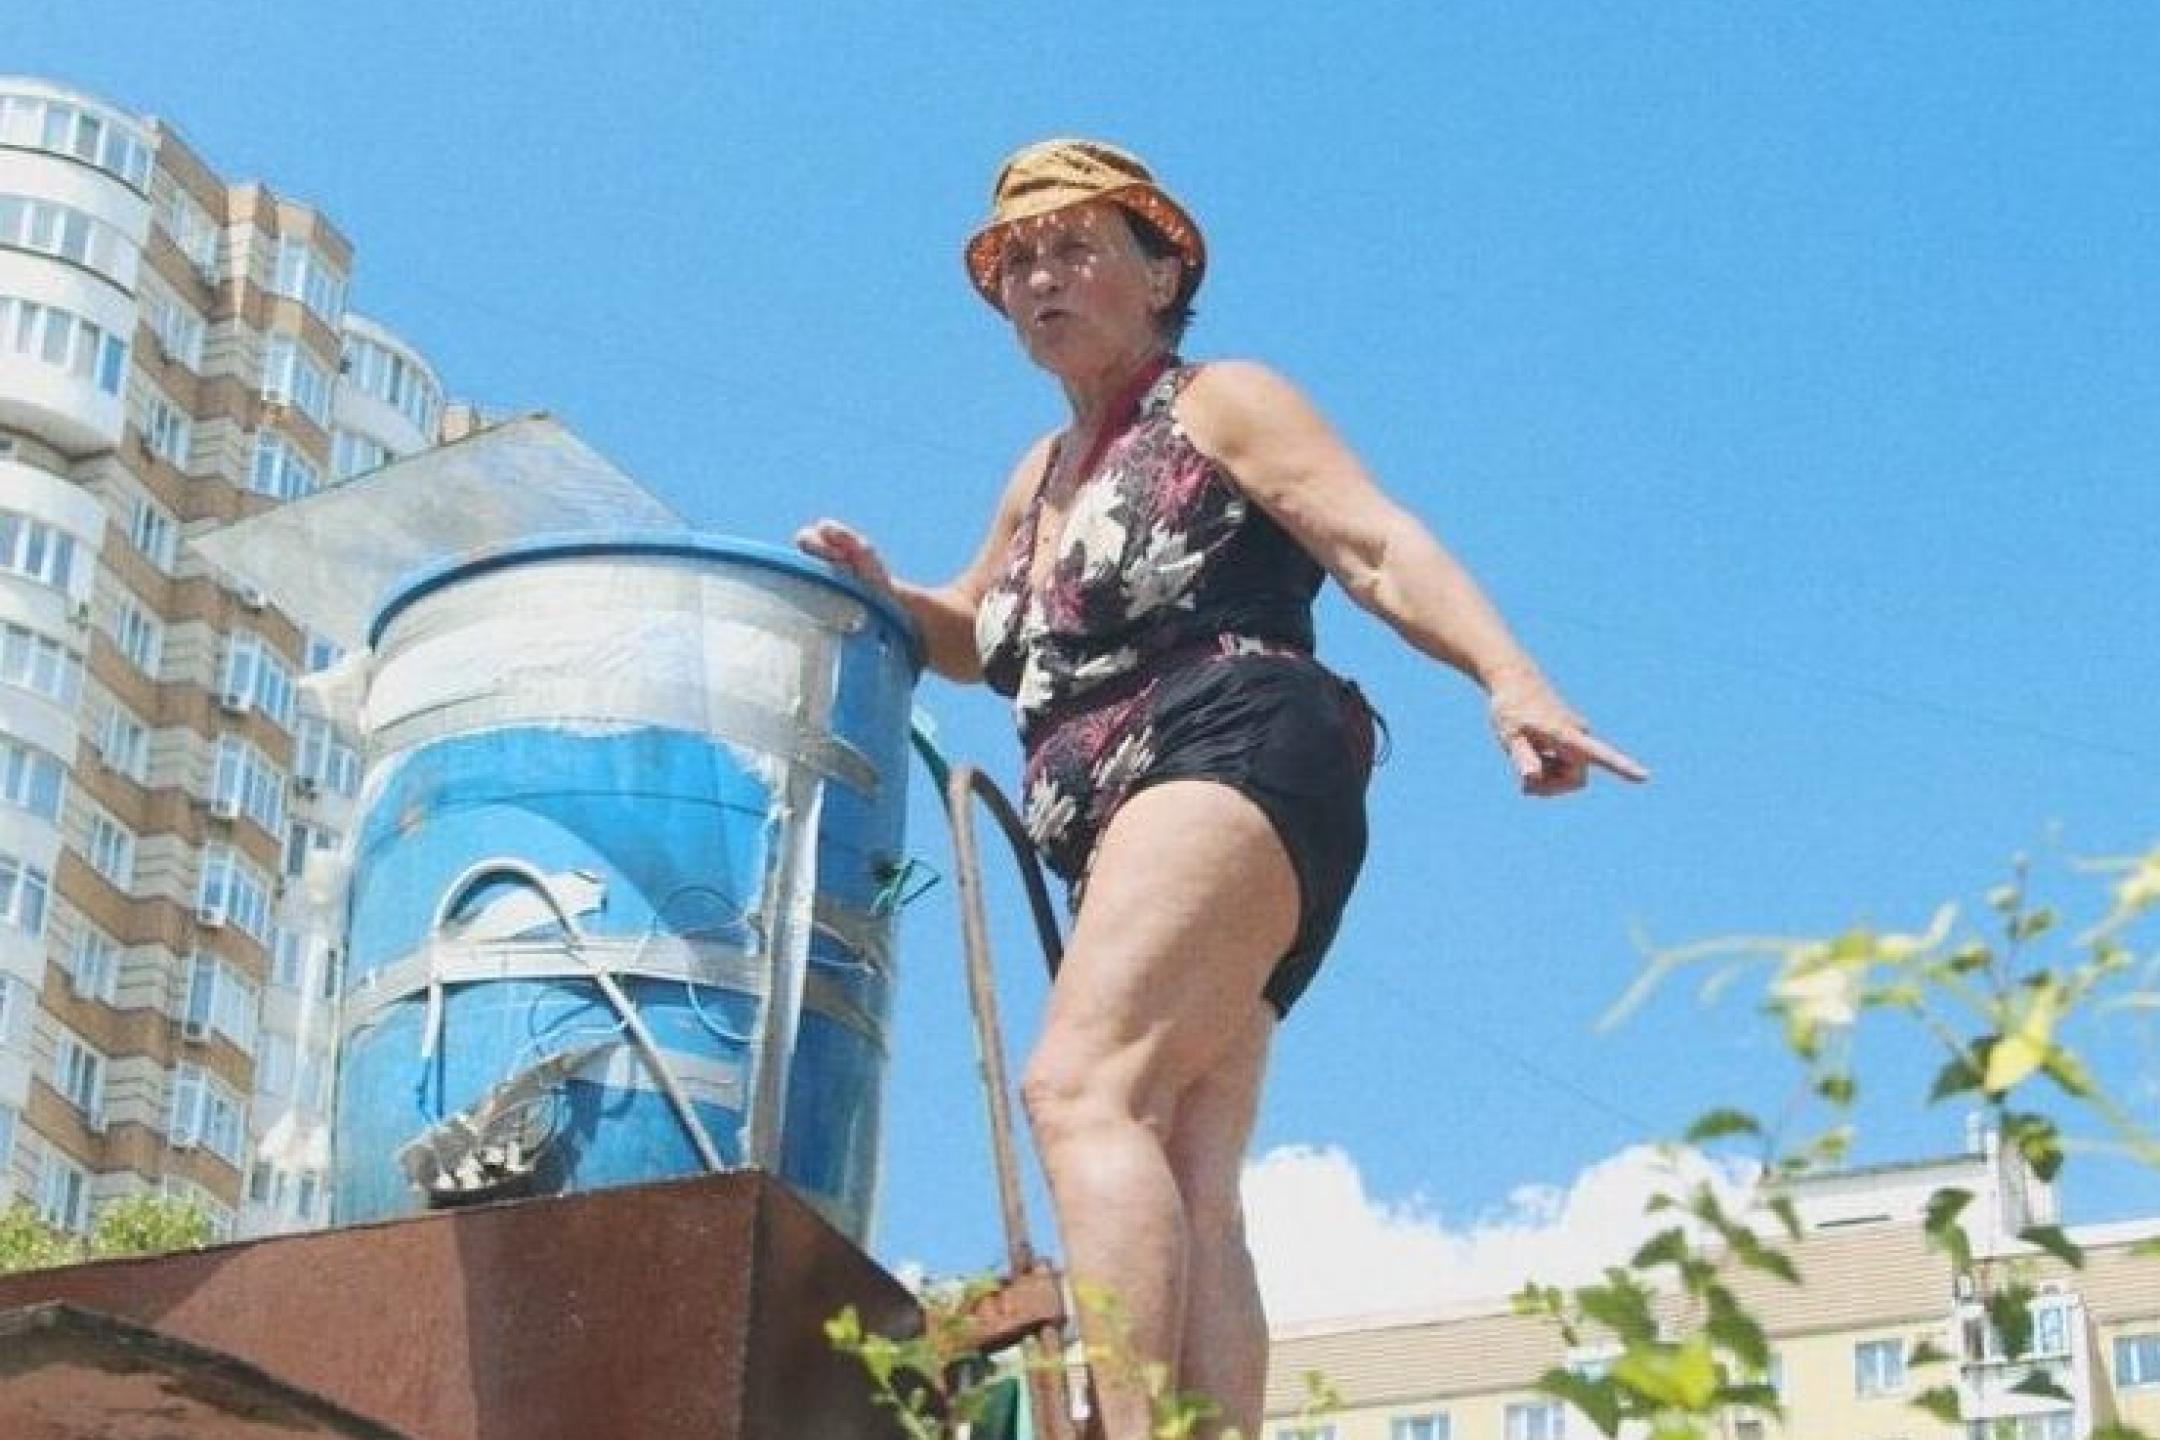 An old woman dressed in a bathing suit and a yellow hat is climbing a ladder towards a blue barrel that stands on a metal construction in a garden surrounded by urban houses